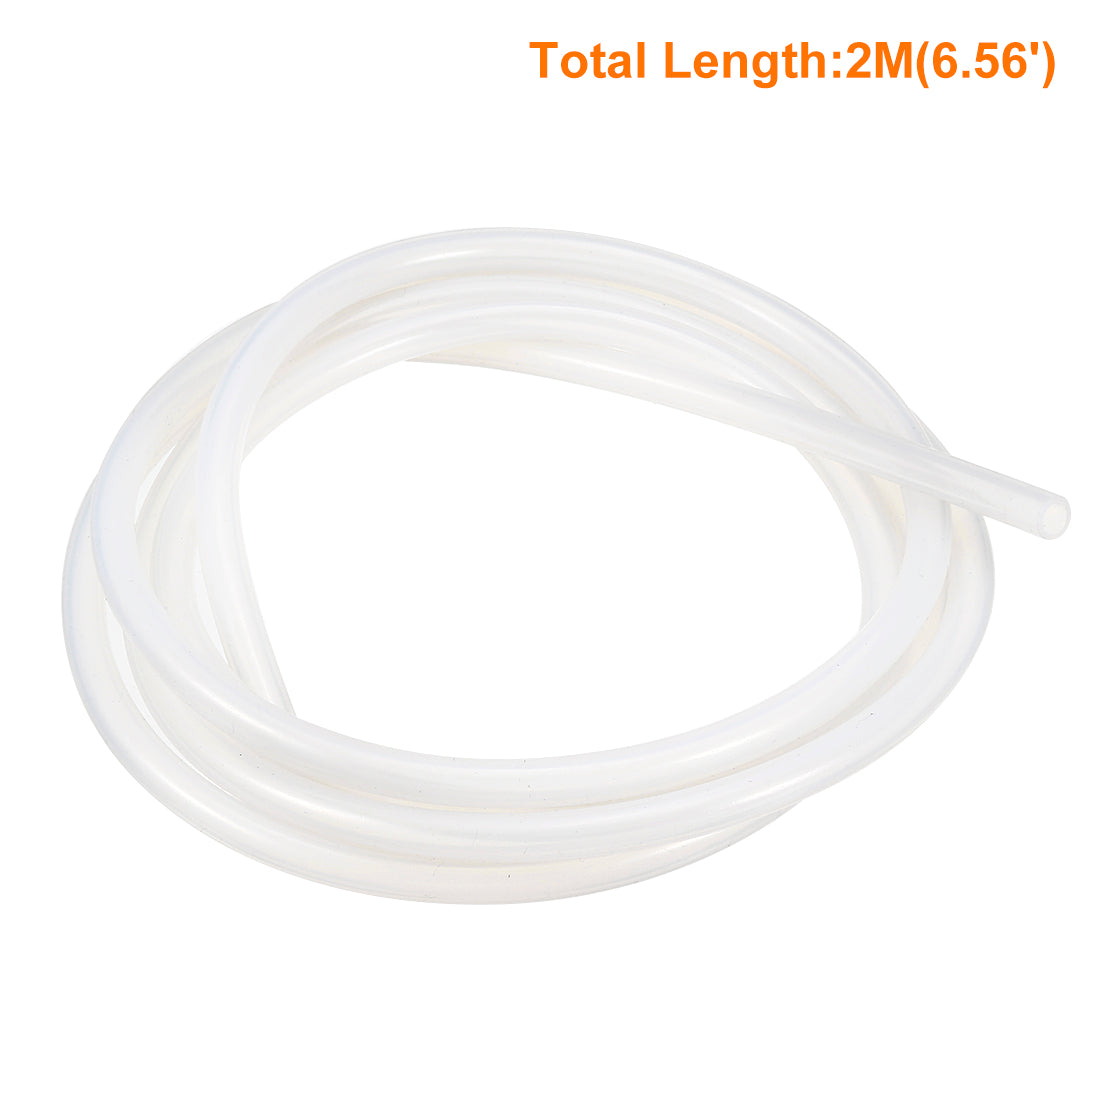 uxcell Uxcell Silicone Tube 2 M Flexible Silicone Rubber Tubing Water Air Hose Pipe for Pump Transfer